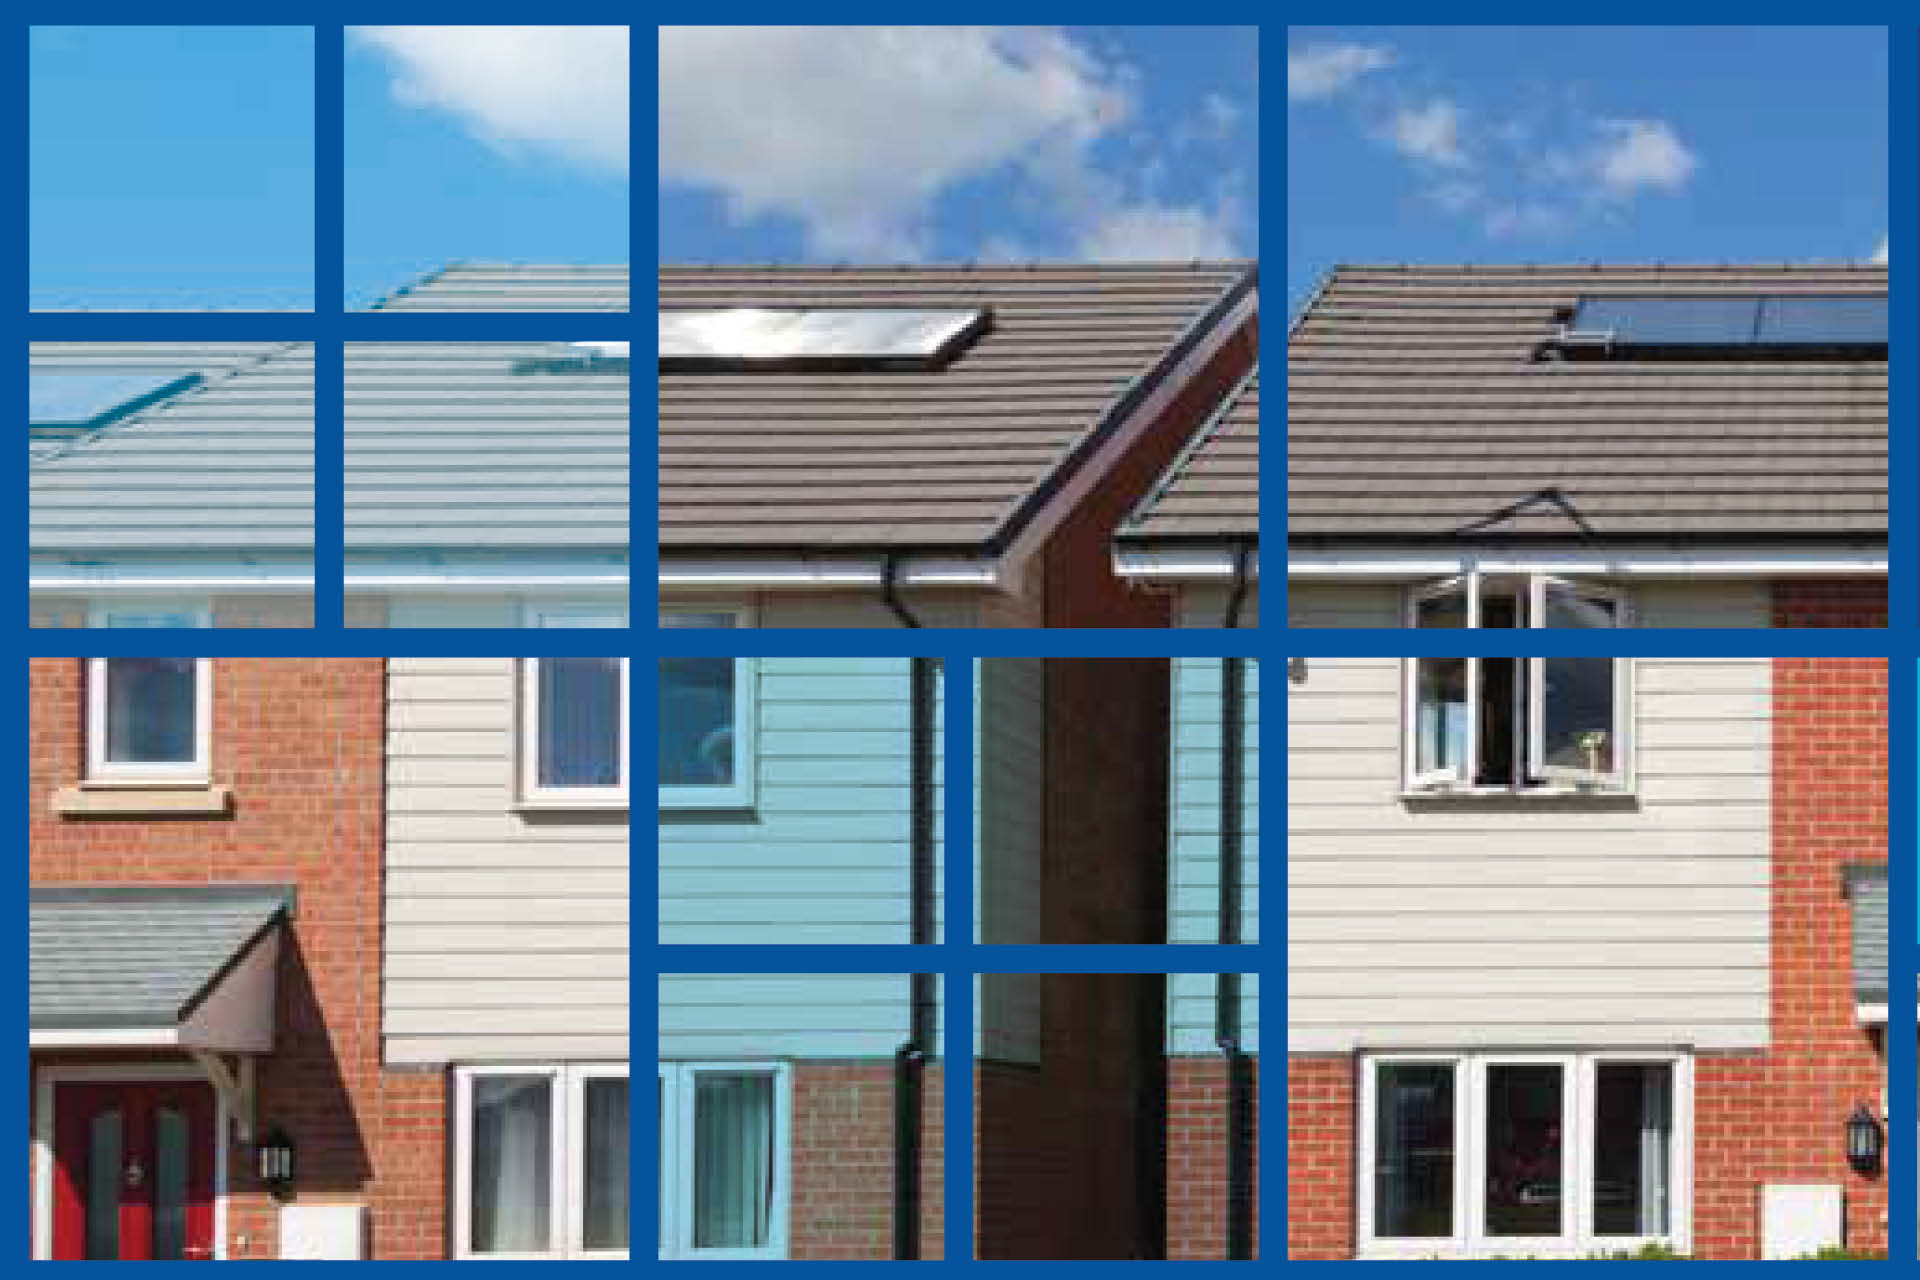 a photo of some houses in the sunshine with a blue square overlay